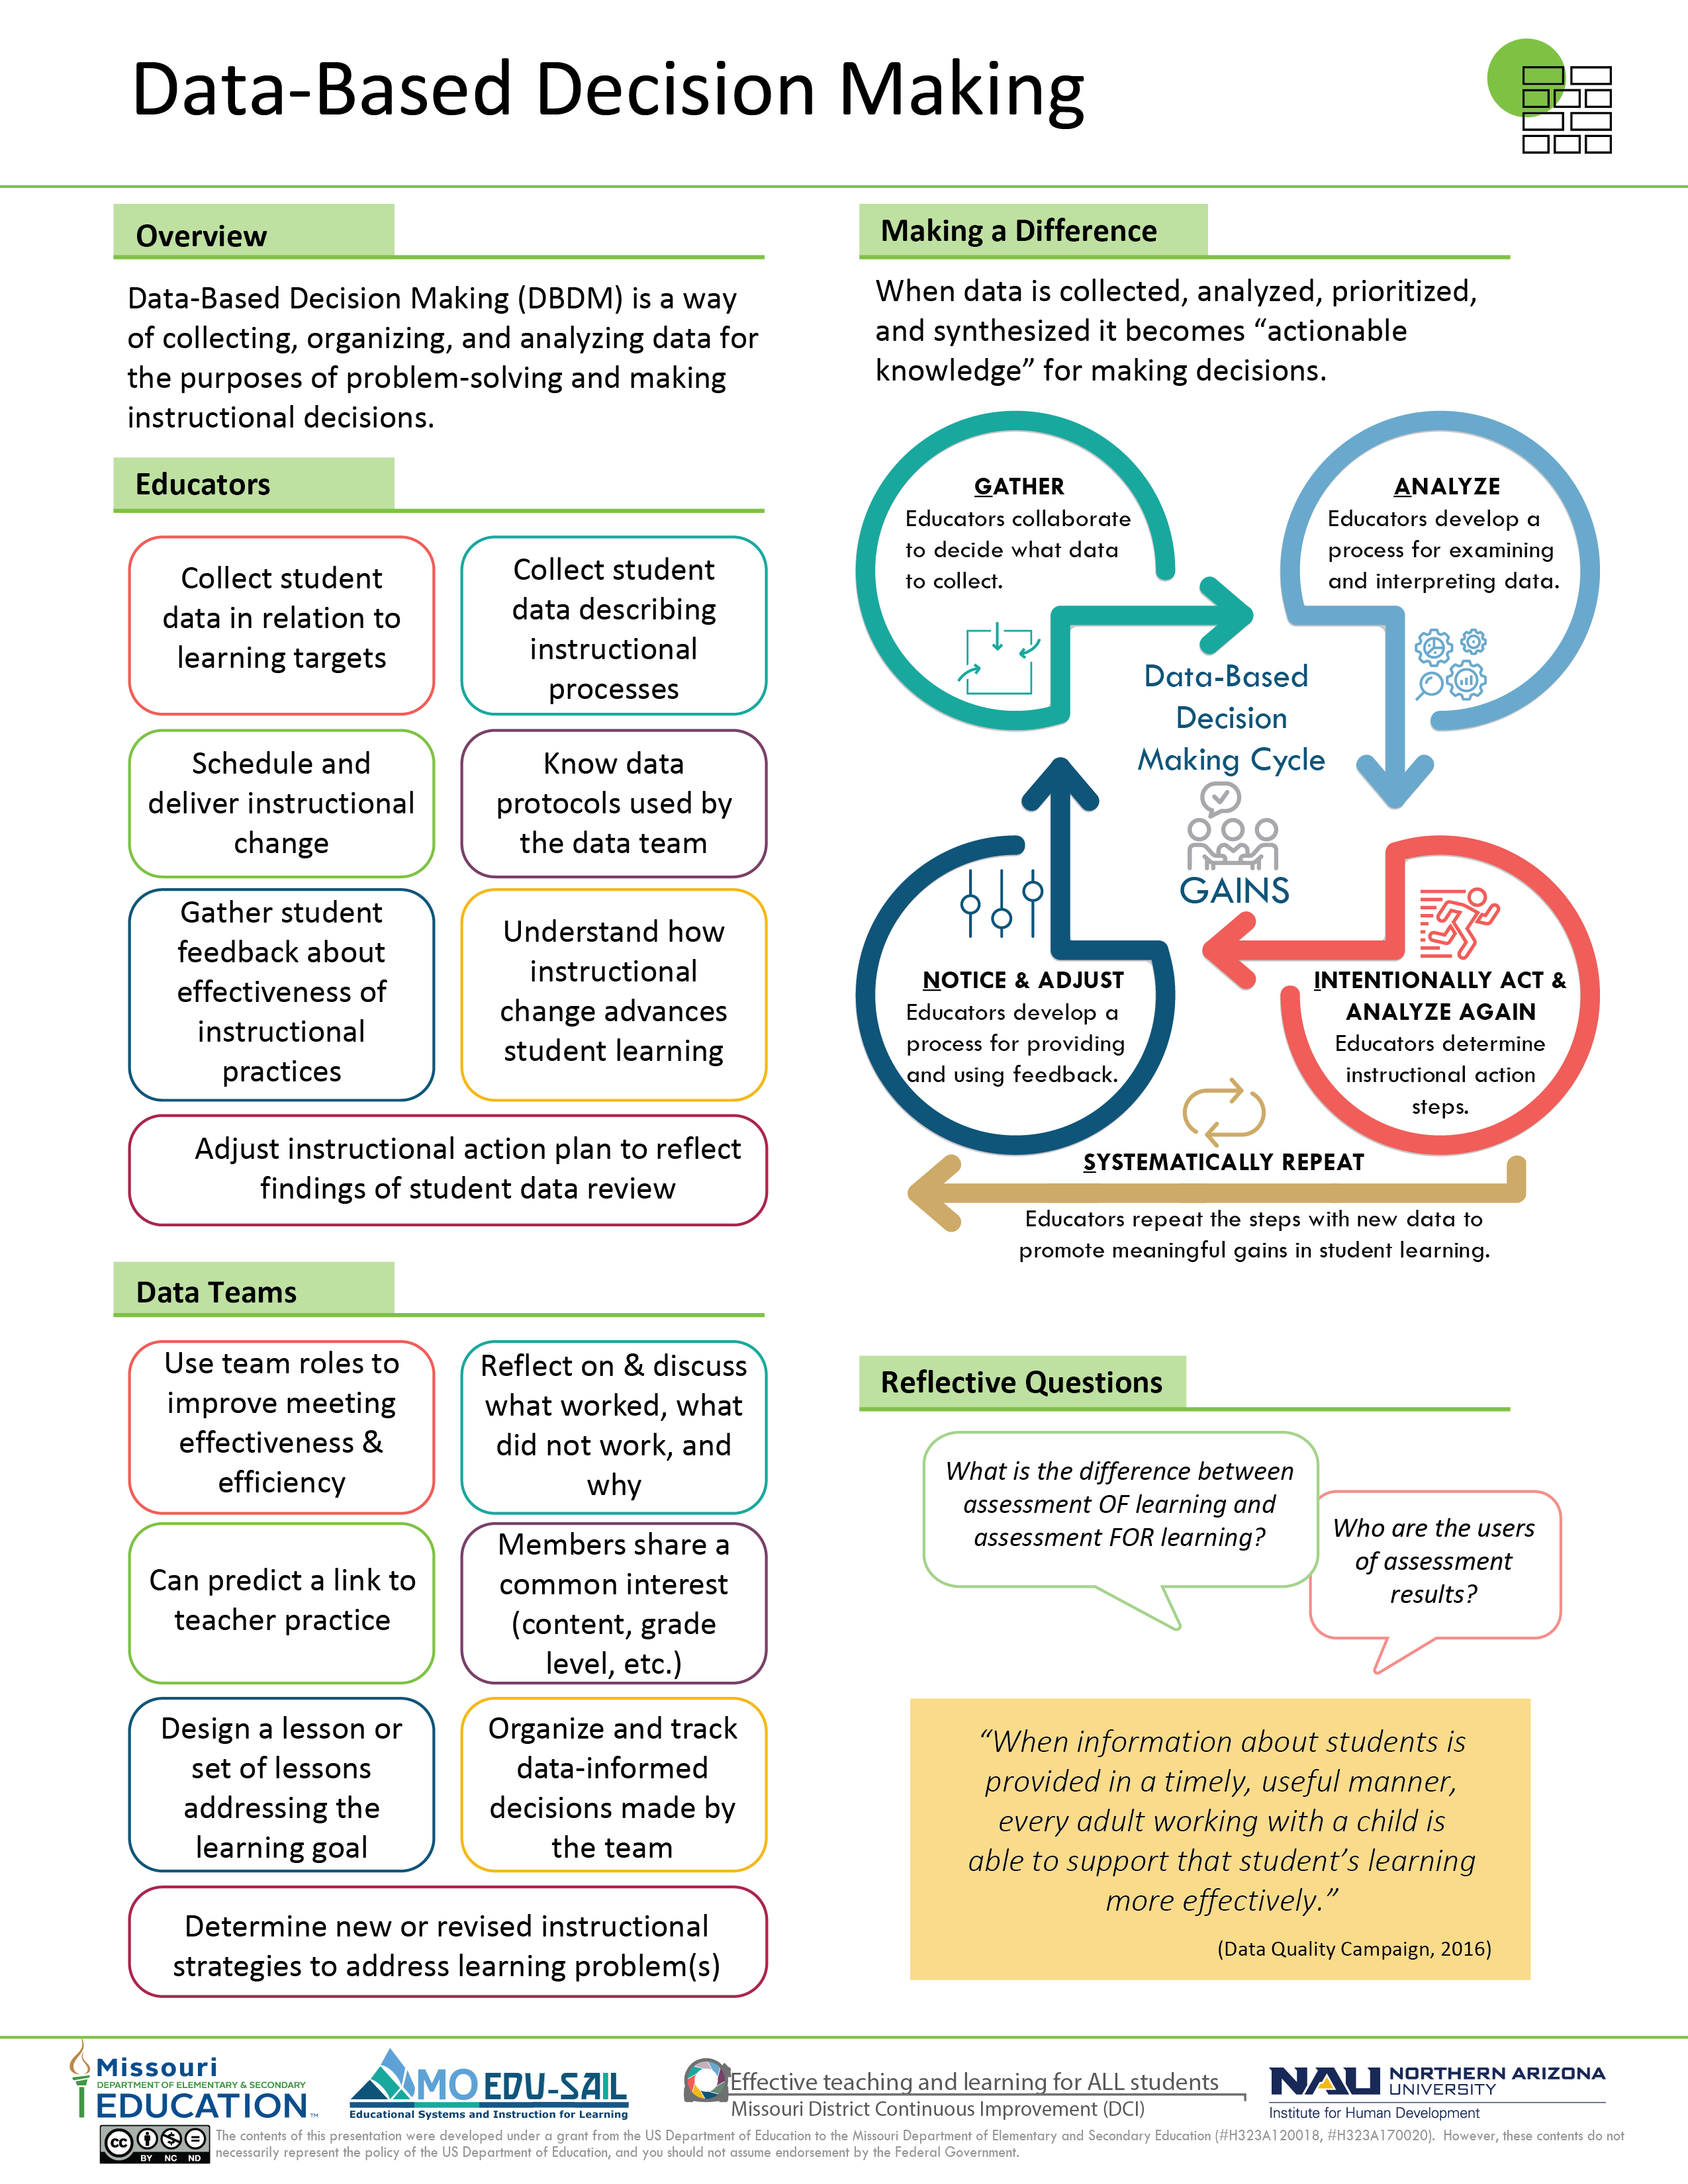 This infographic is meant to give a quick overivew of the module in graphic form. DBDM Infographic shows the GAINS cycle of G) Gather, A) Analyze, I) Intentionally Act & Analyze Again, N) Notice & Adjust, and S) Systematically Repeat. Benefits for teachers include • insight into what really works, • awareness of student strengths and misconceptions, • structure for using student learning data to inform instruction, • data to inform and improve building-wide instructional goals, and • improved level of collective efficacy. Benefits for students include: • improved teaching leading to deeper understanding of content, • deeper understanding of content, and • higher rates of success. The purpose of DBDM is to • Emphasizes using data to improve instruction for all students, not only those who are struggling • Promotes commitment to deep reflection, process, and follow-through • Relies on evidence of learning (data) to guide collaboration